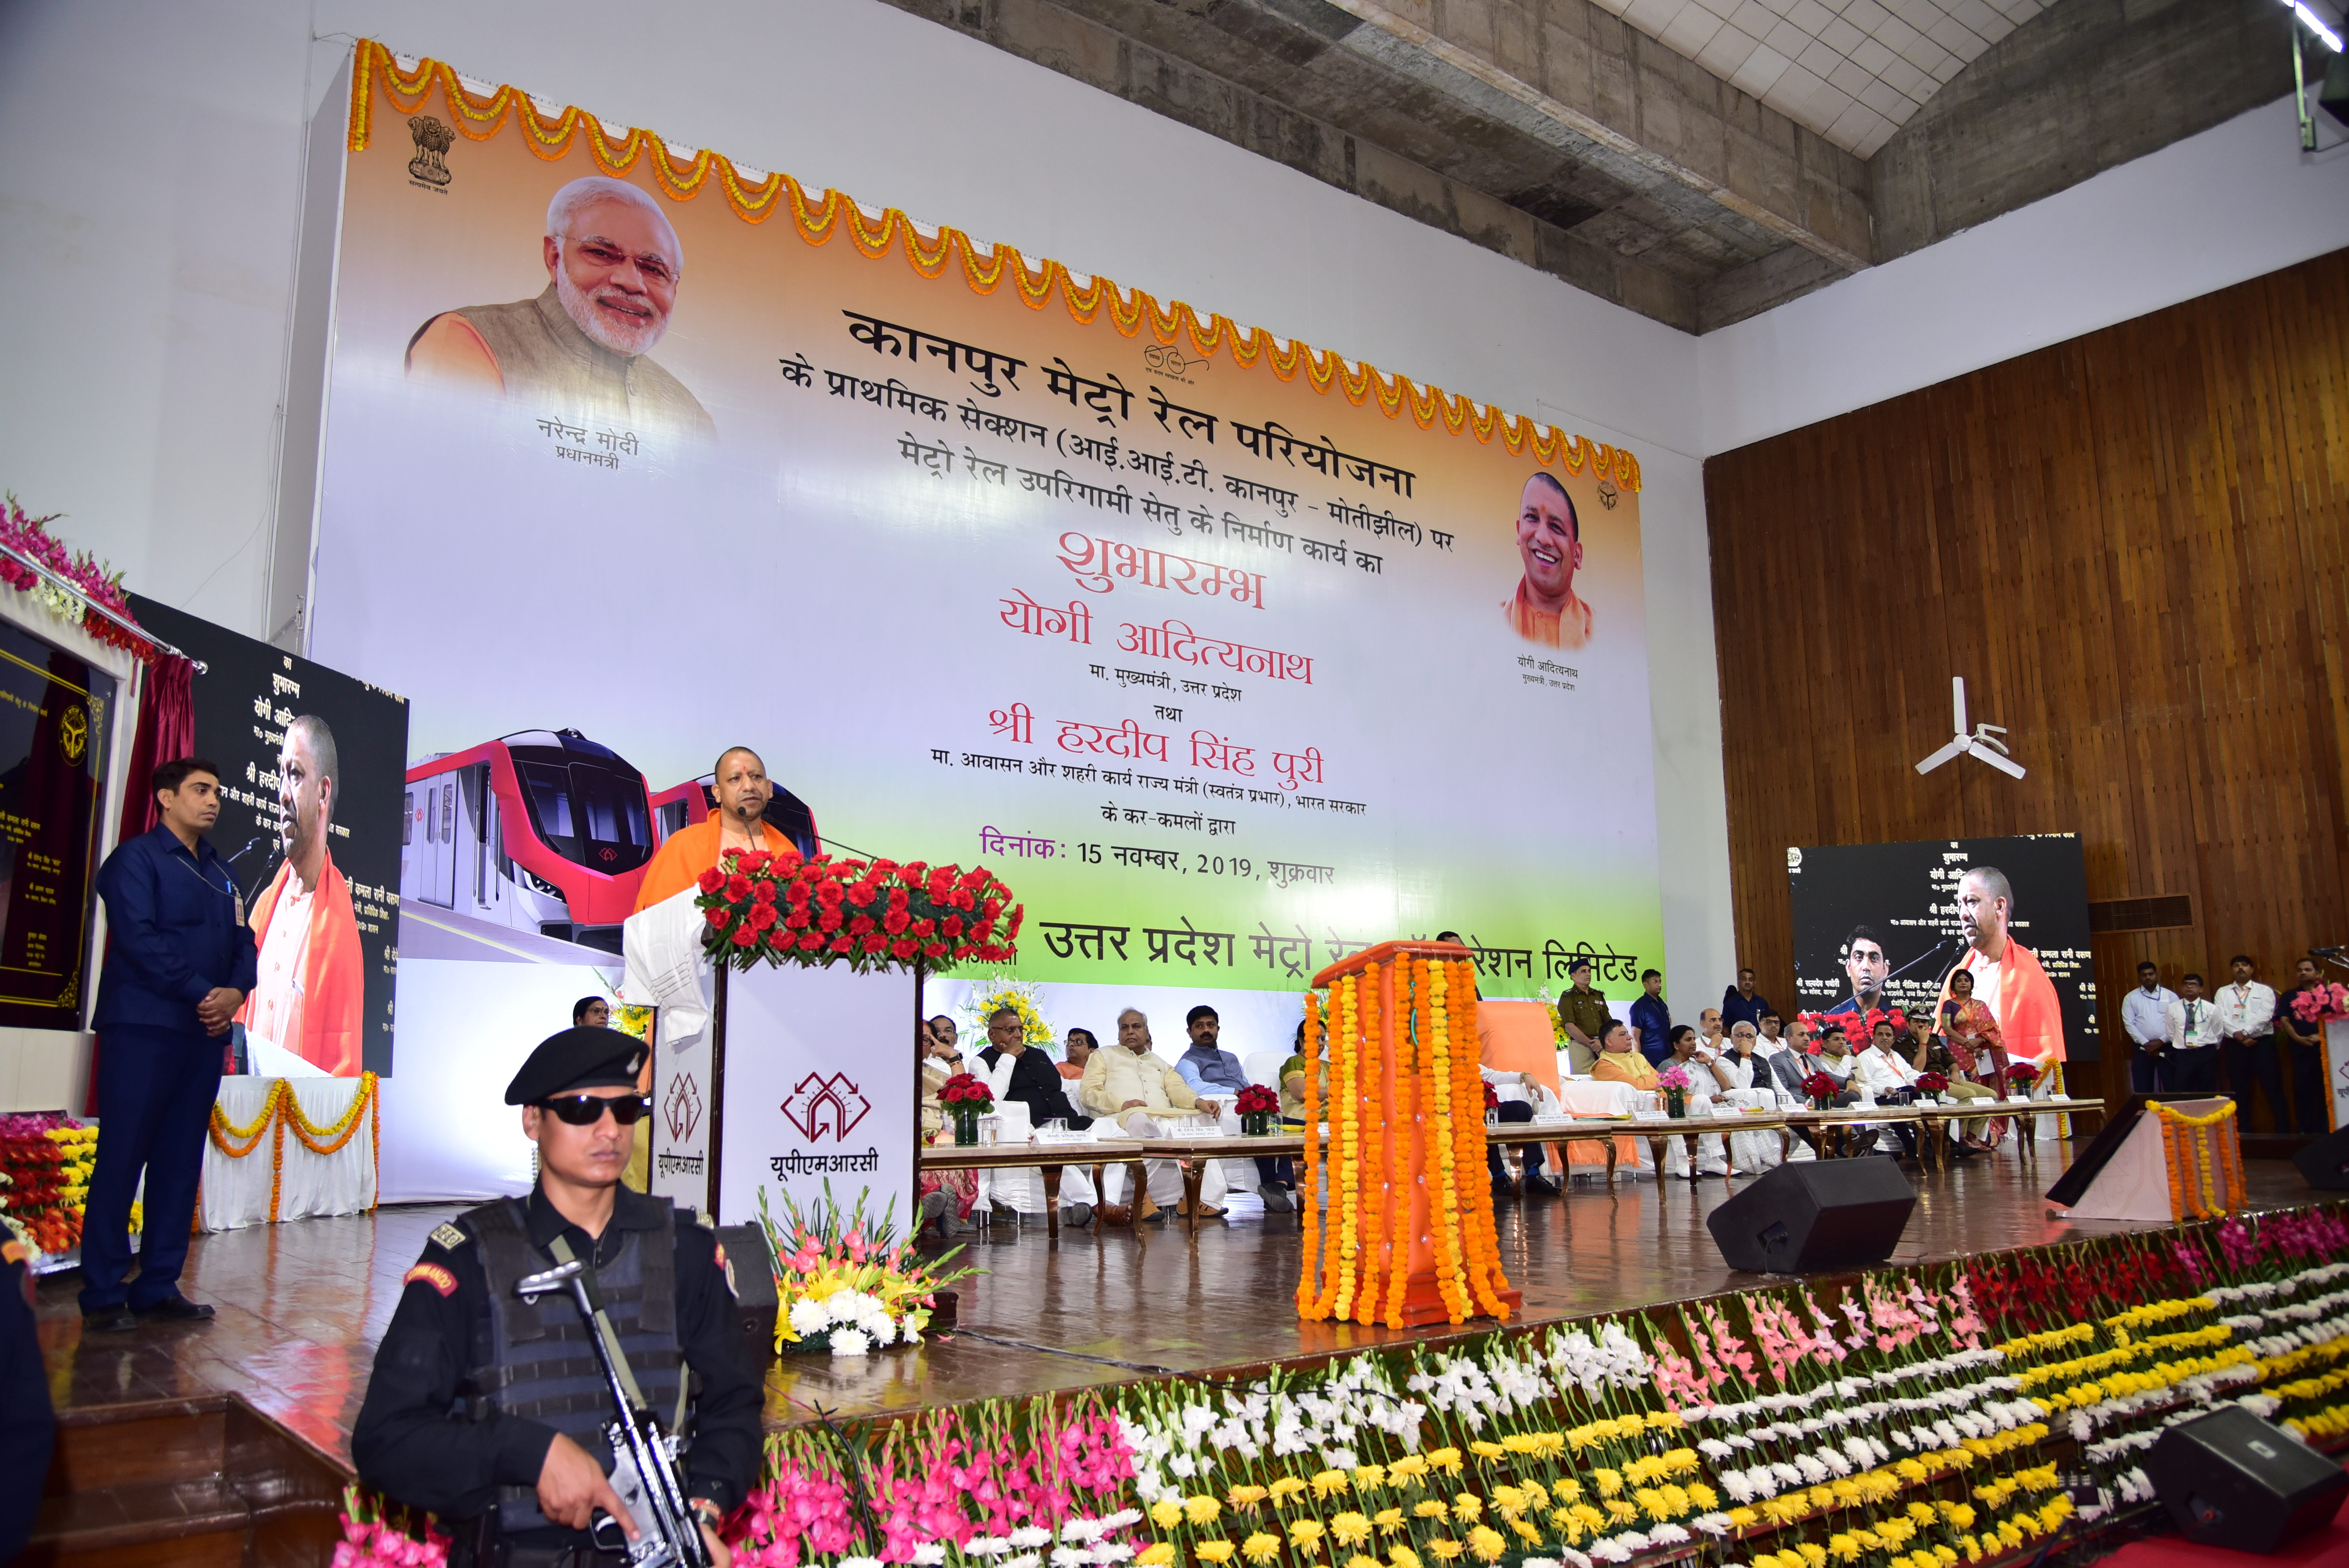 Hon'ble CM Yogi Adityanath Inaugurates the Civil Construction work for Kanpur Metro's Priority Section